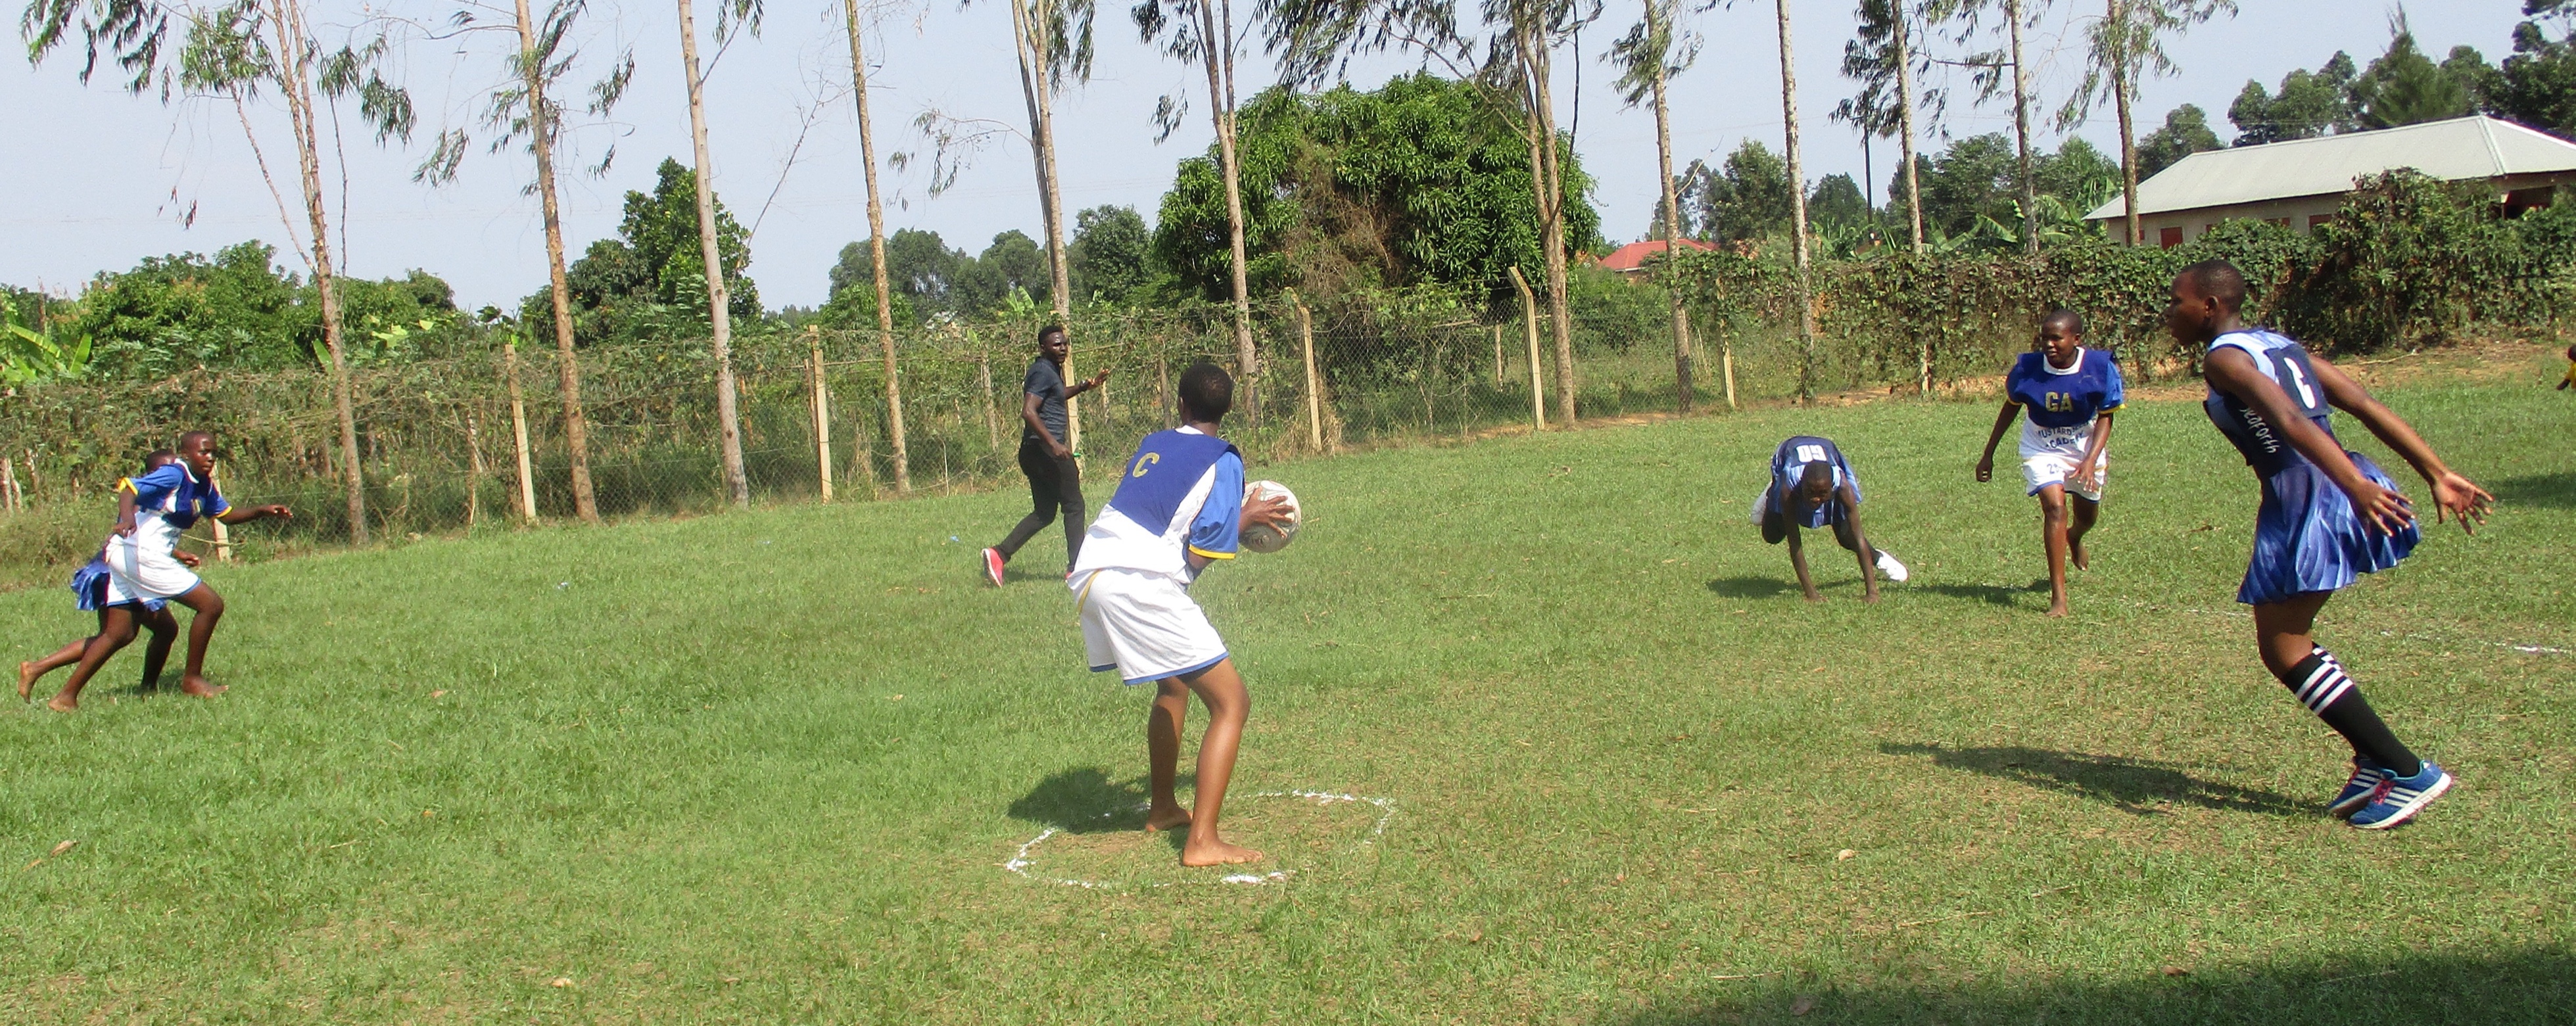 Netball is the most popular and competitive sport for girls in Uganda. 